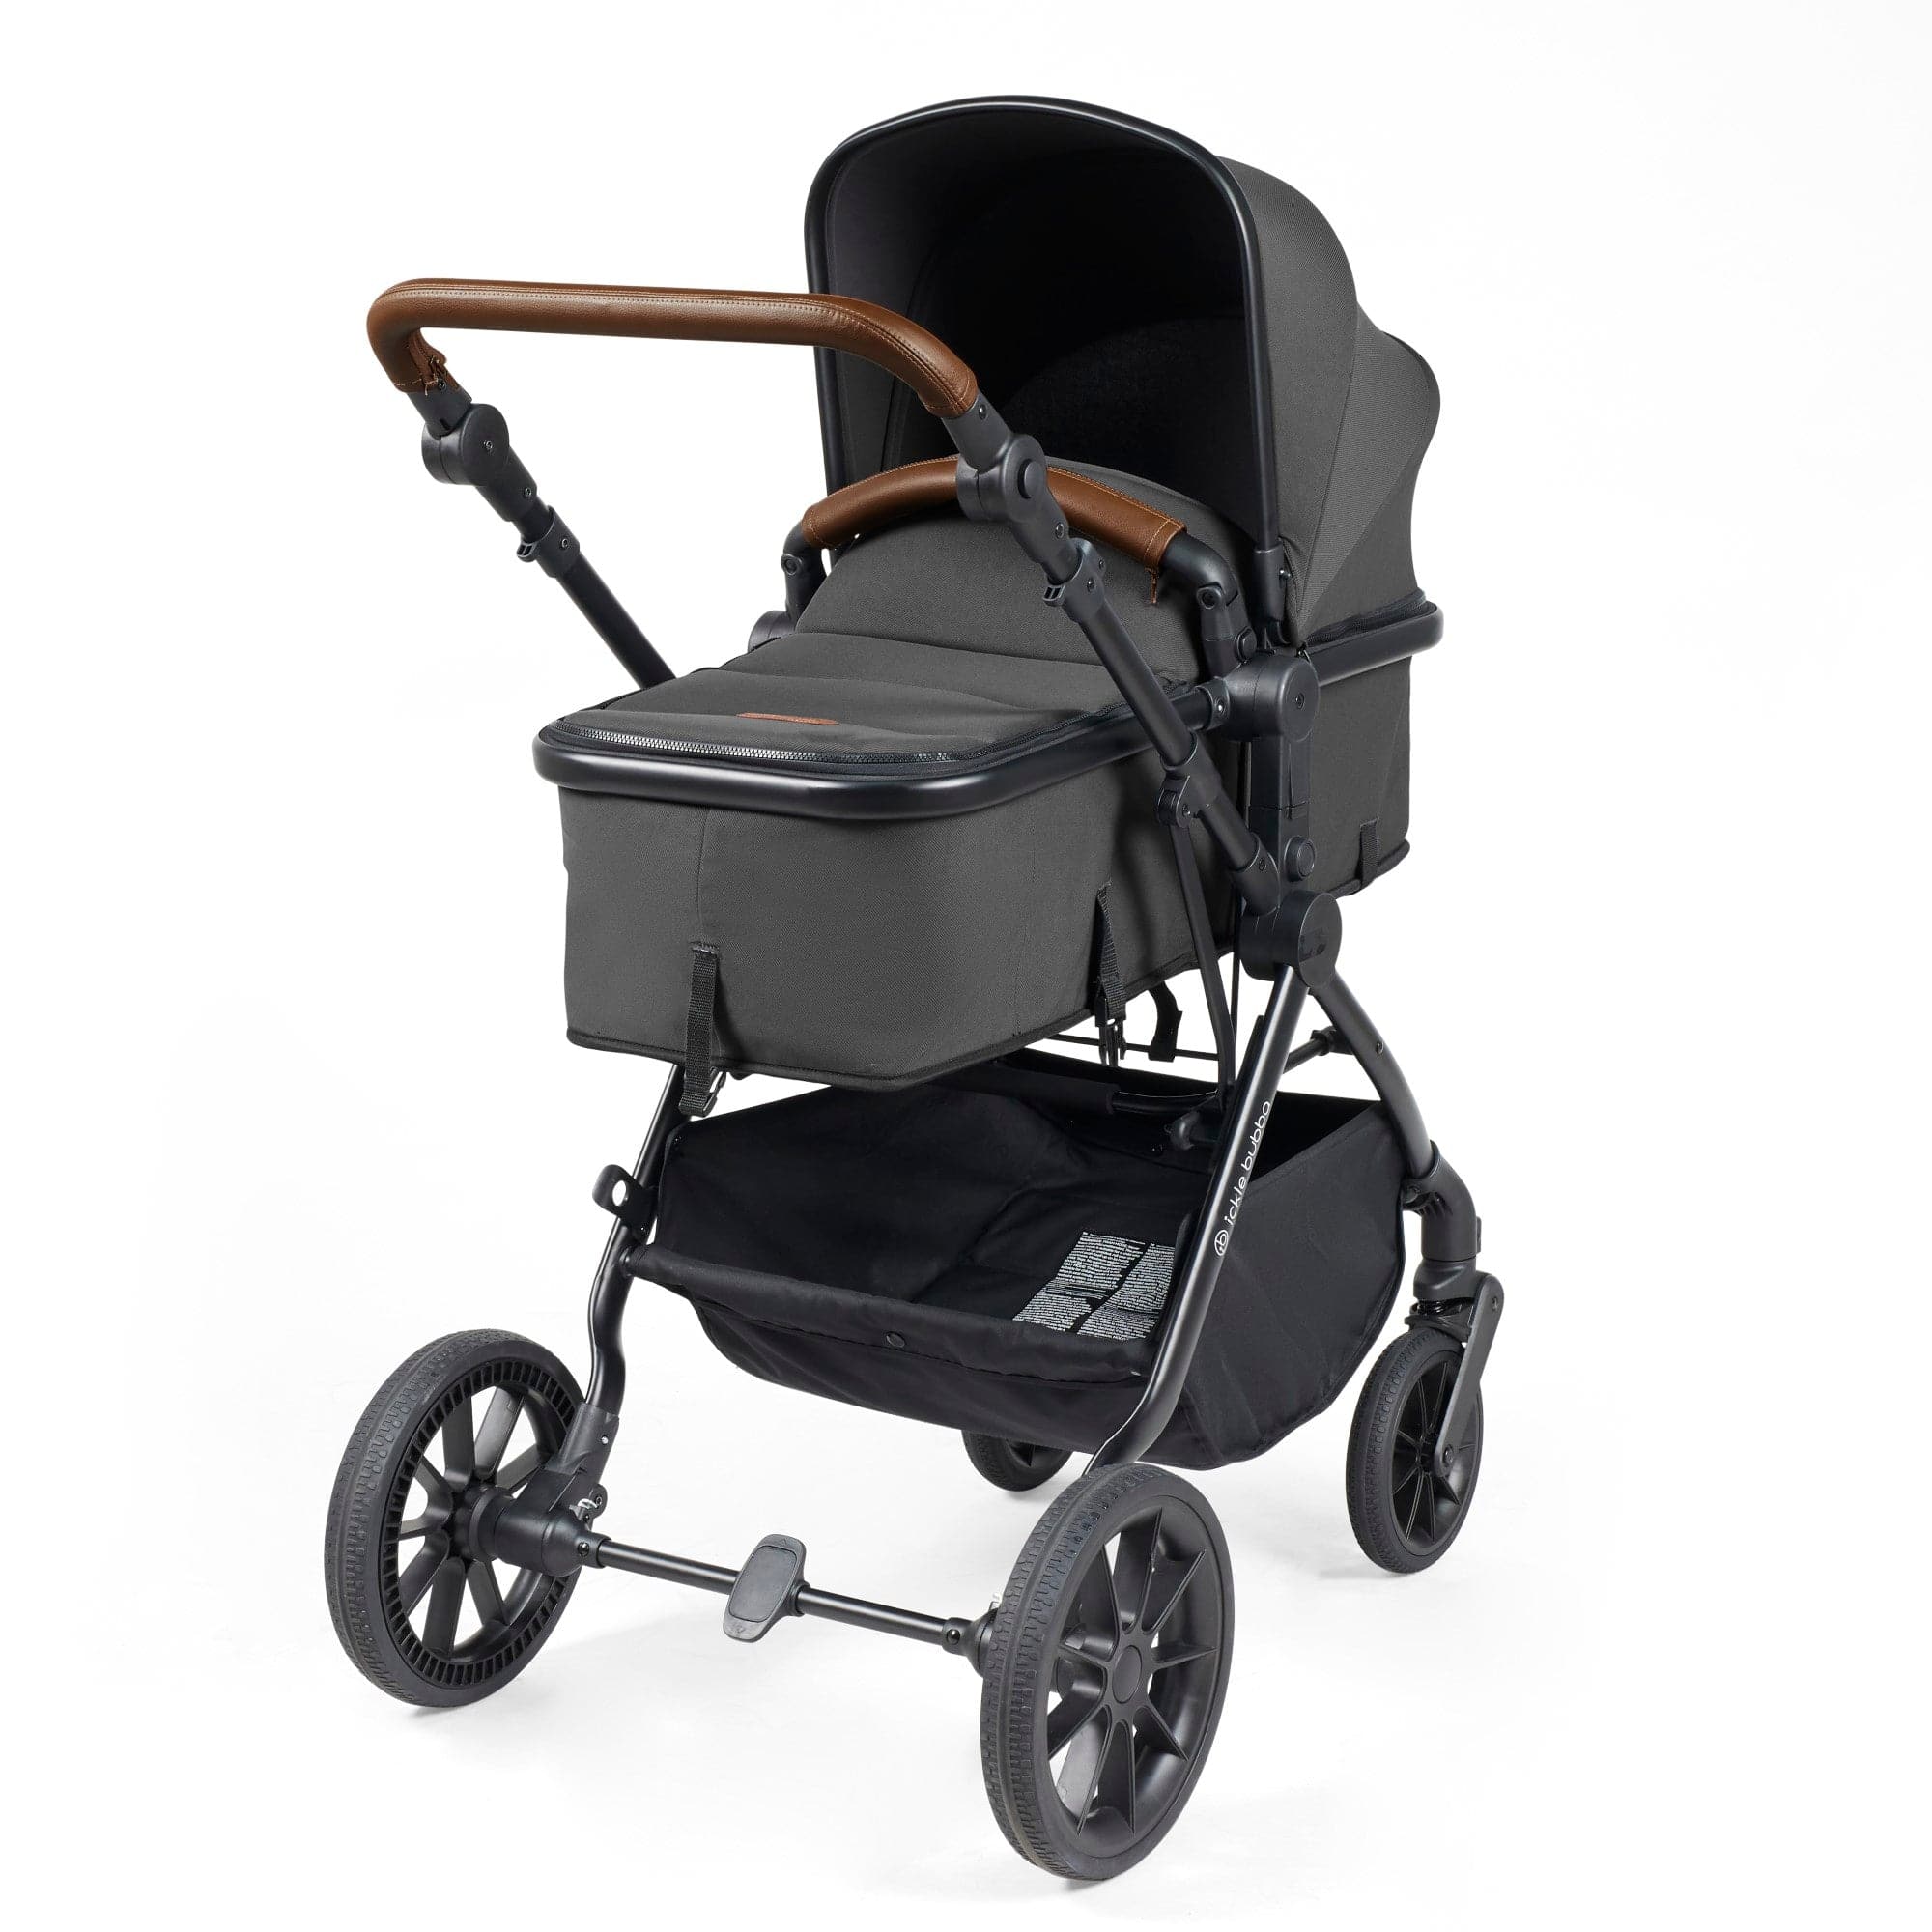 Ickle Bubba Cosmo I-Size Travel System With Stratus Car Seat & Isofix Base - Graphite Grey - For Your Little One